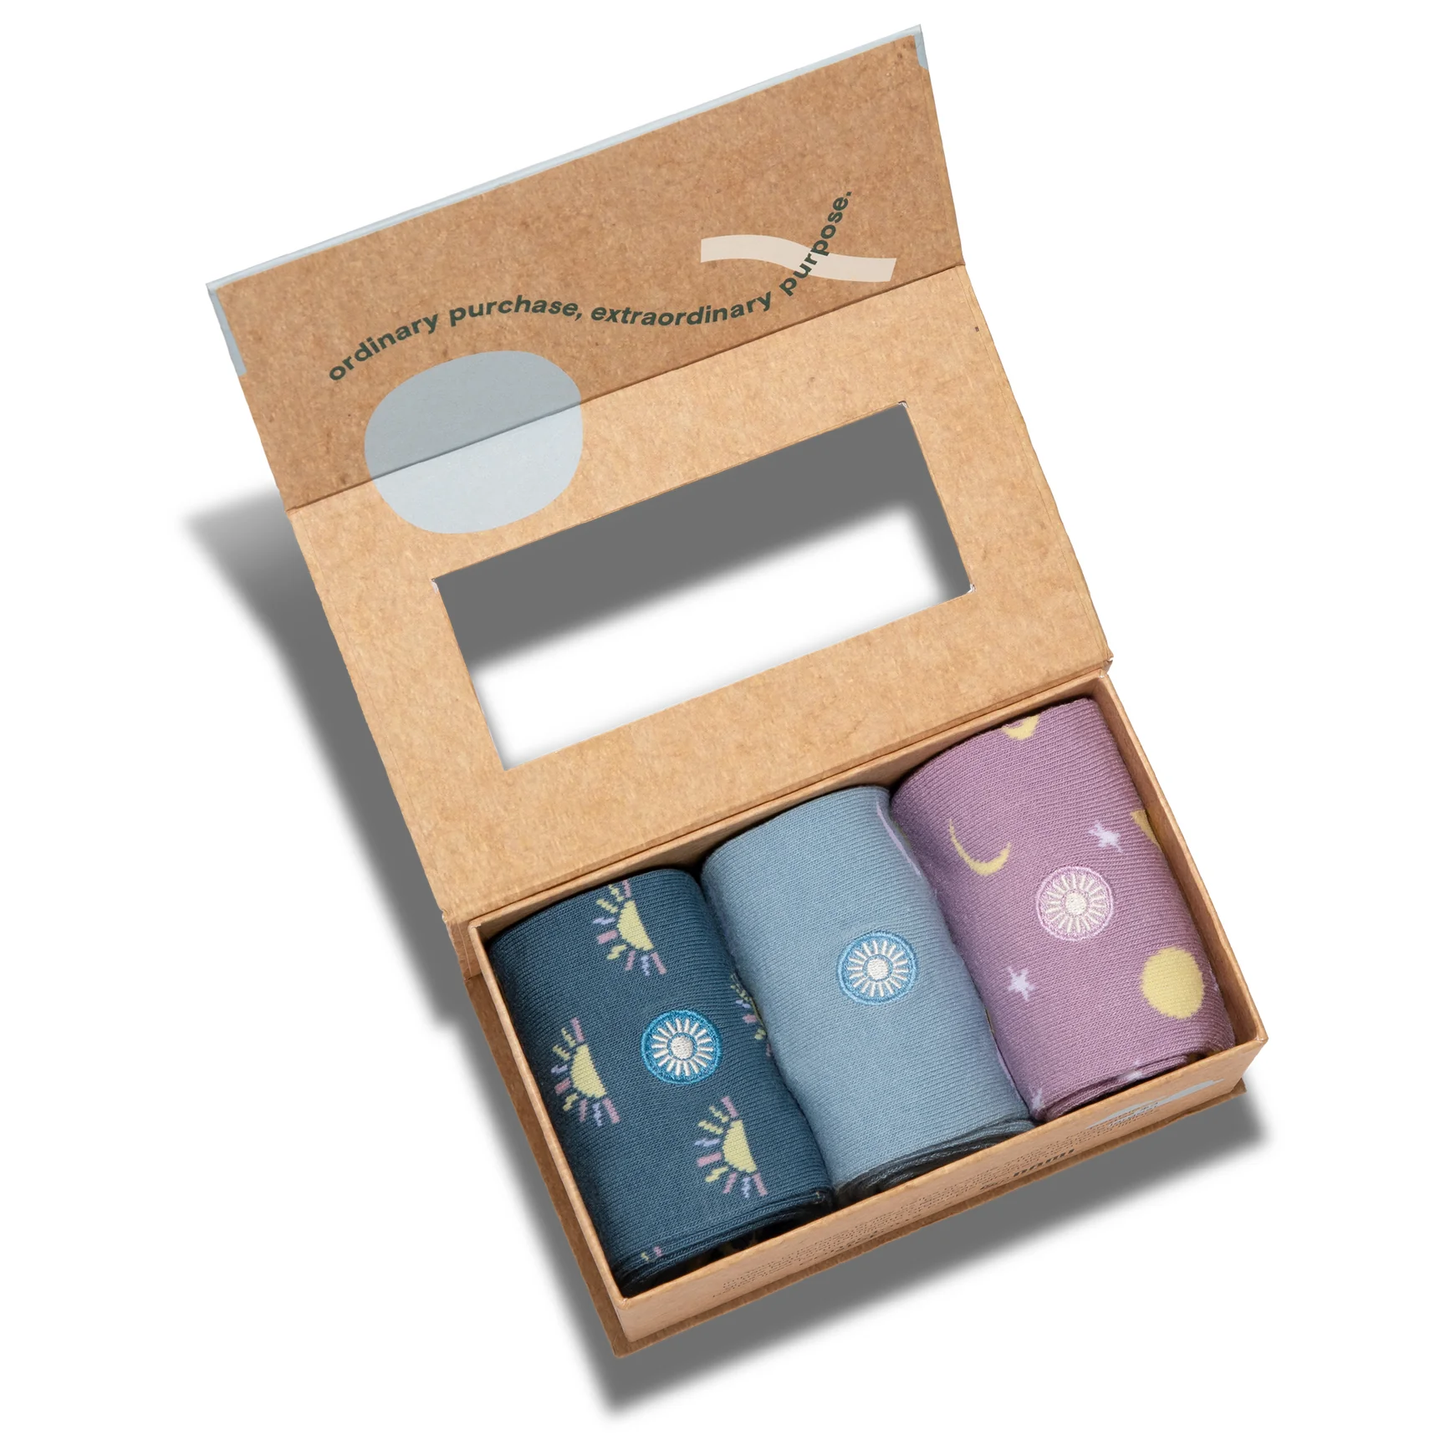 Conscious Step - Gift Box: Socks that Support Mental Health